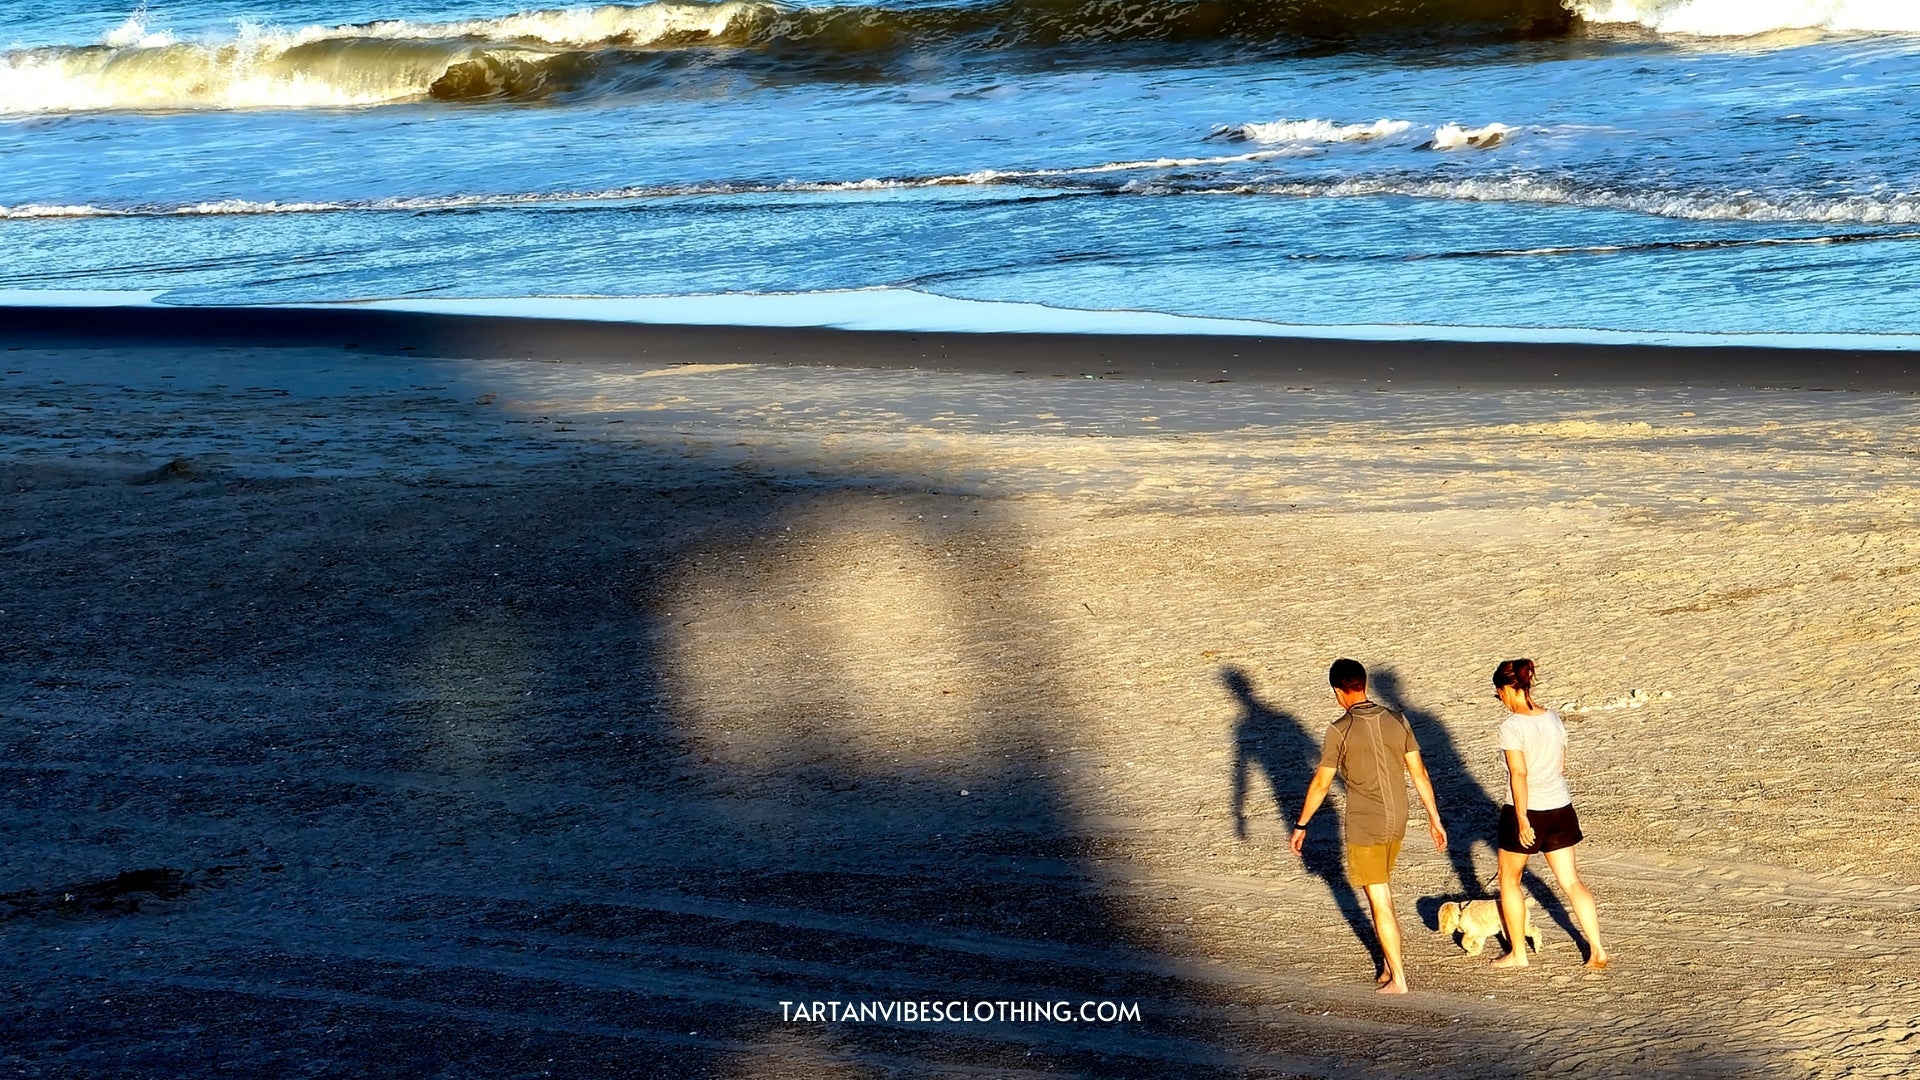 Emerald Isle, North Carolina, United States-June 26, 2021: A couple and their dog on an evening stroll along the beach